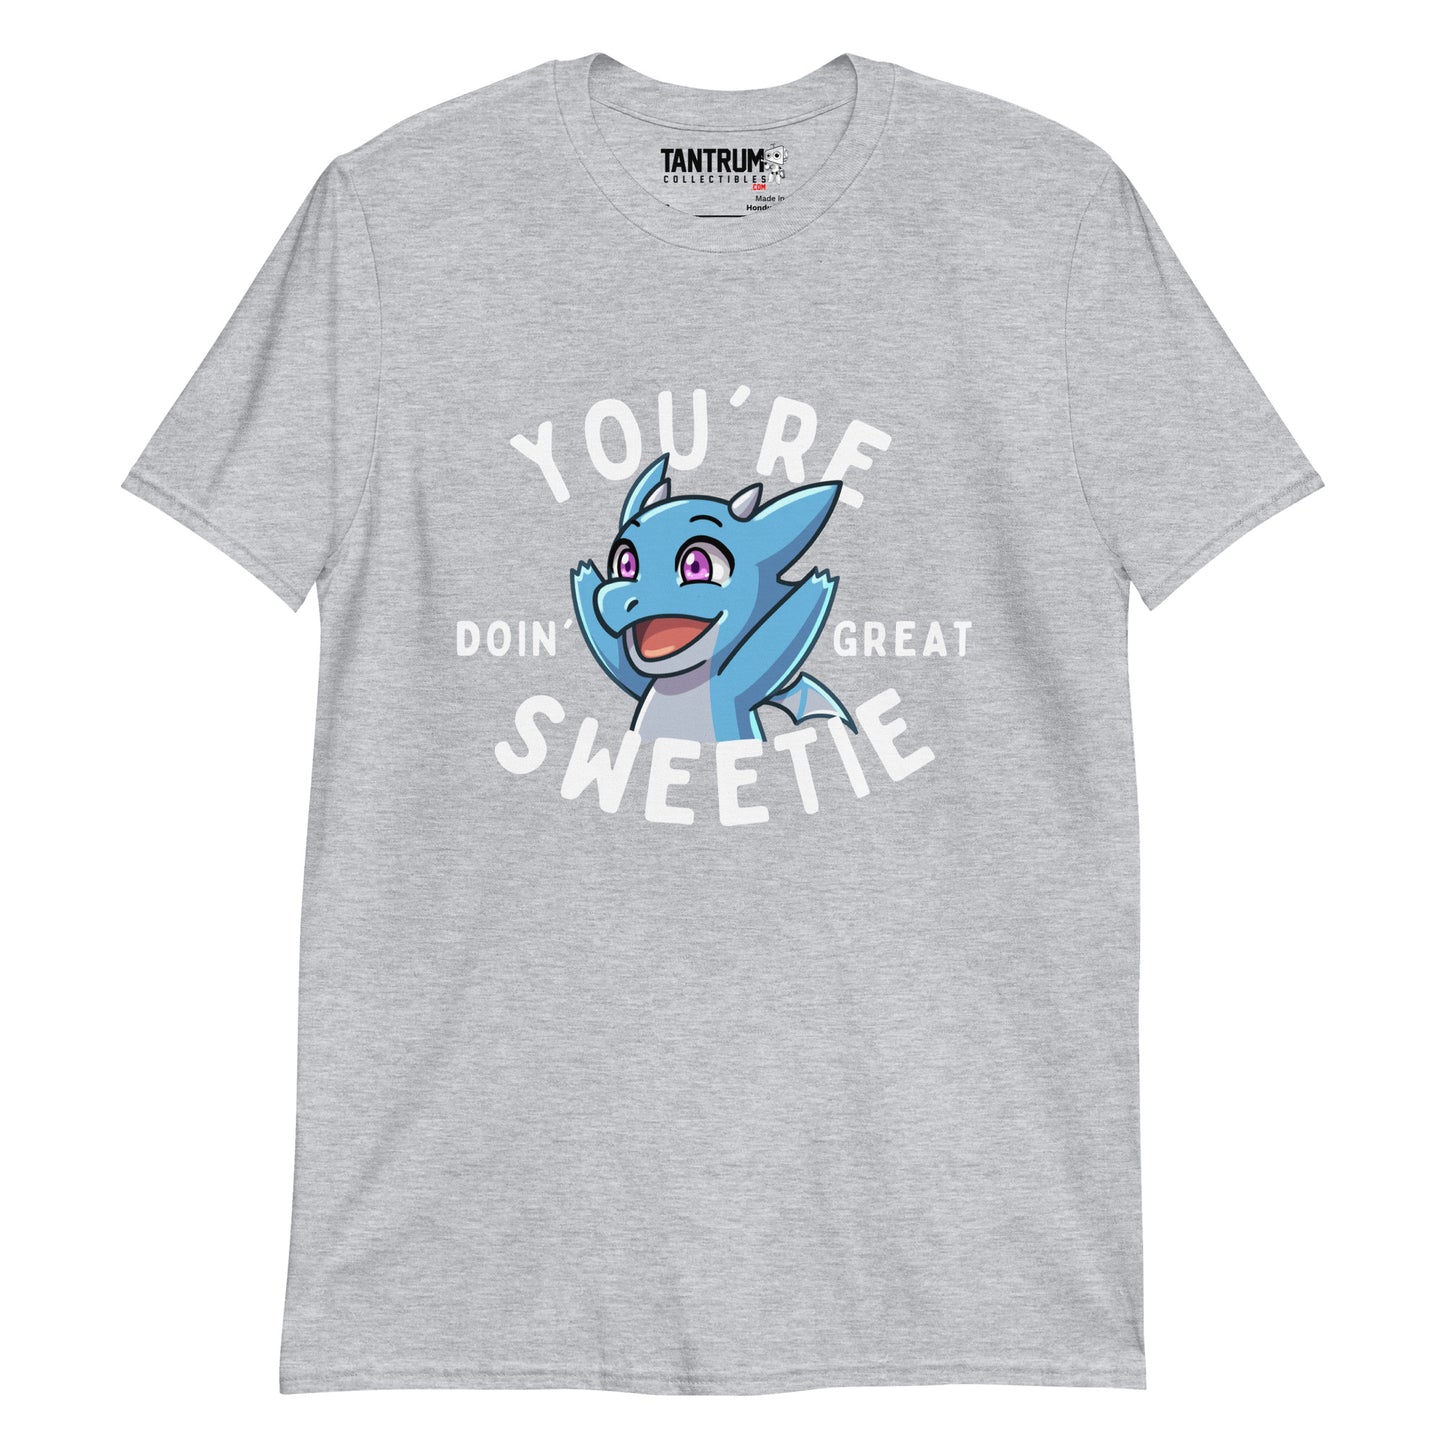 The Dragon Feeney - Unisex T-Shirt - You're Doing Great Sweetie (Streamer Purchase)